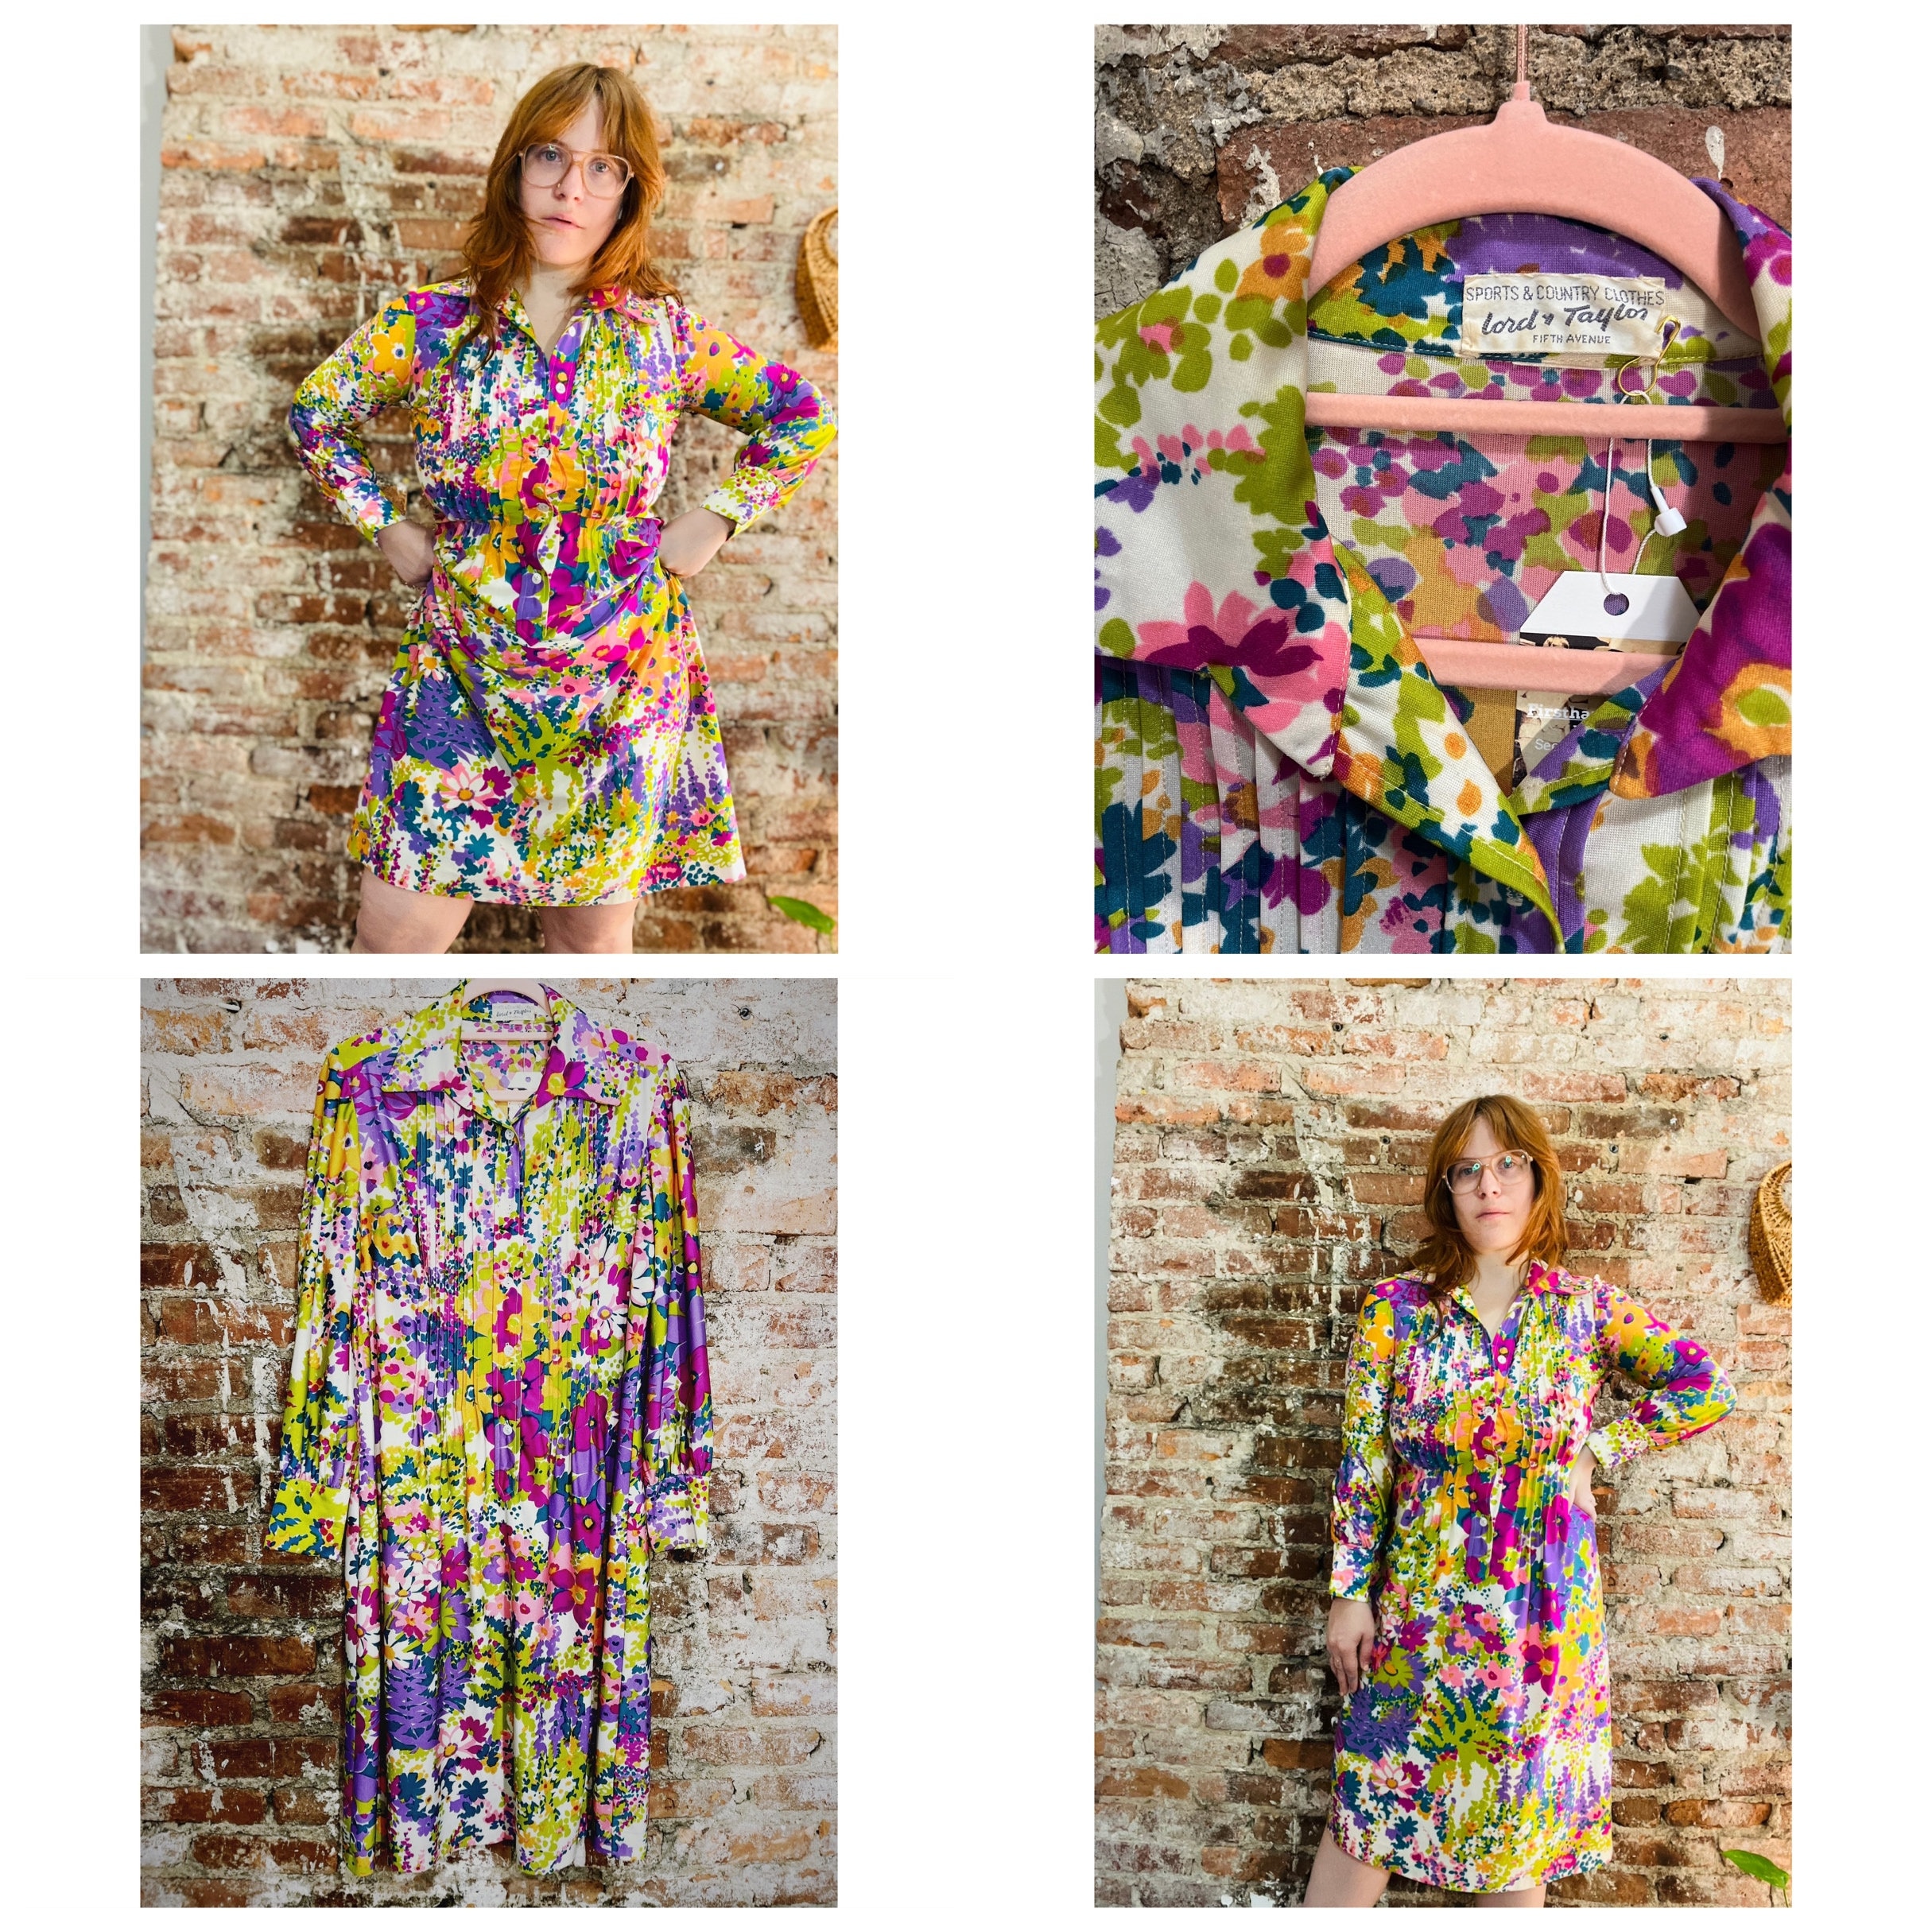 Lord & Taylor 1960's Floral Tunic Dress